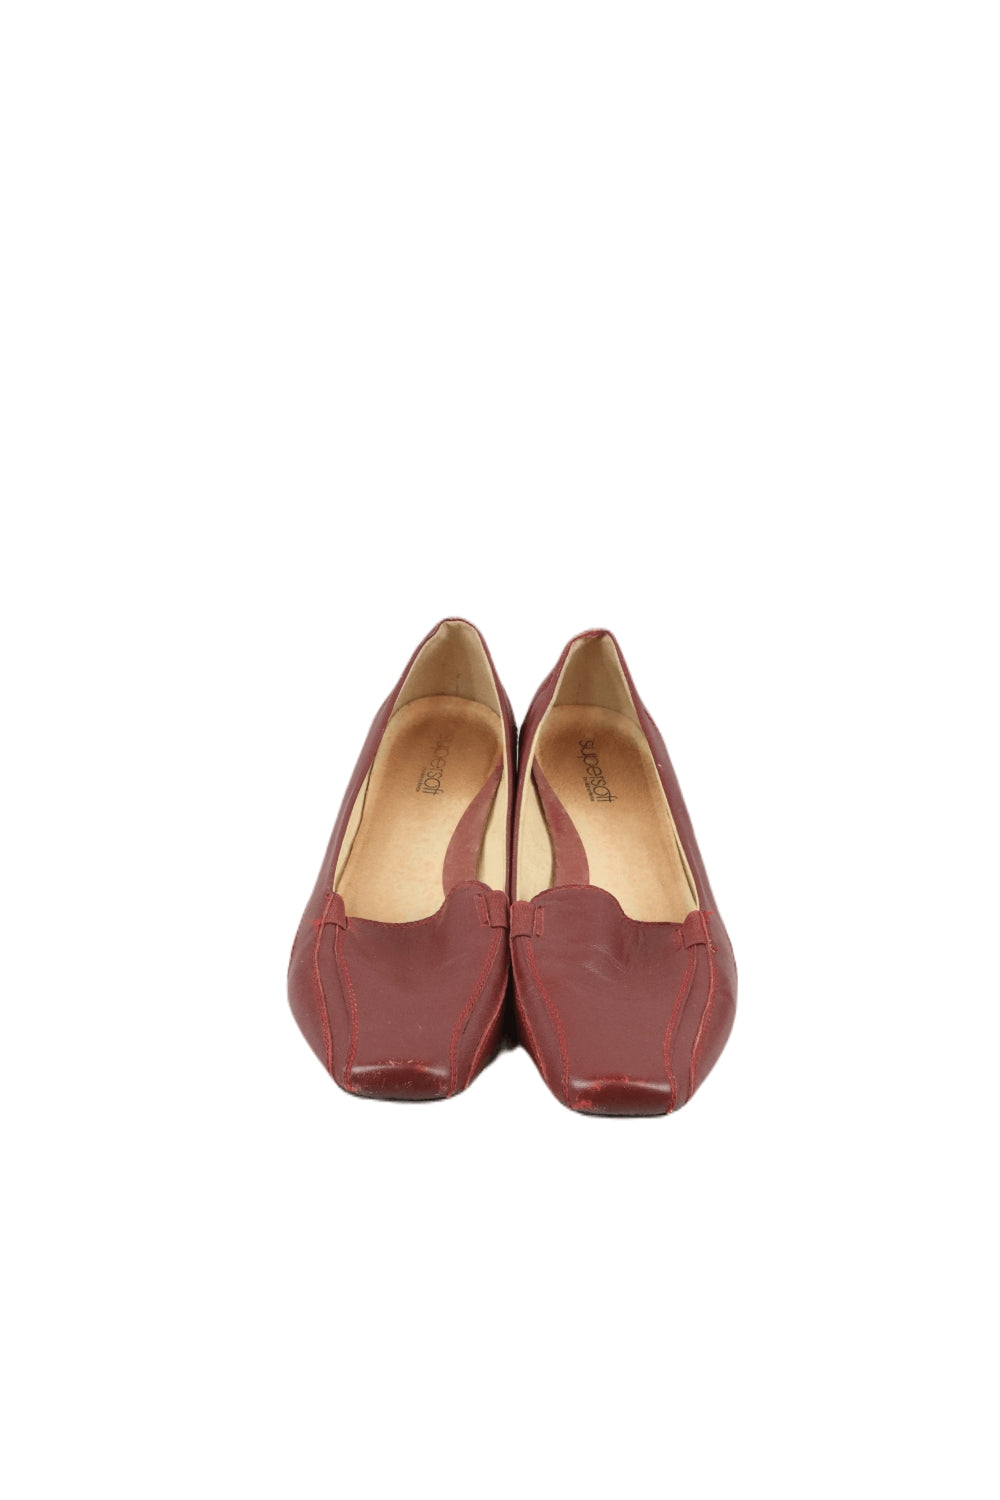 Supersoft Burgundy Shoes 10